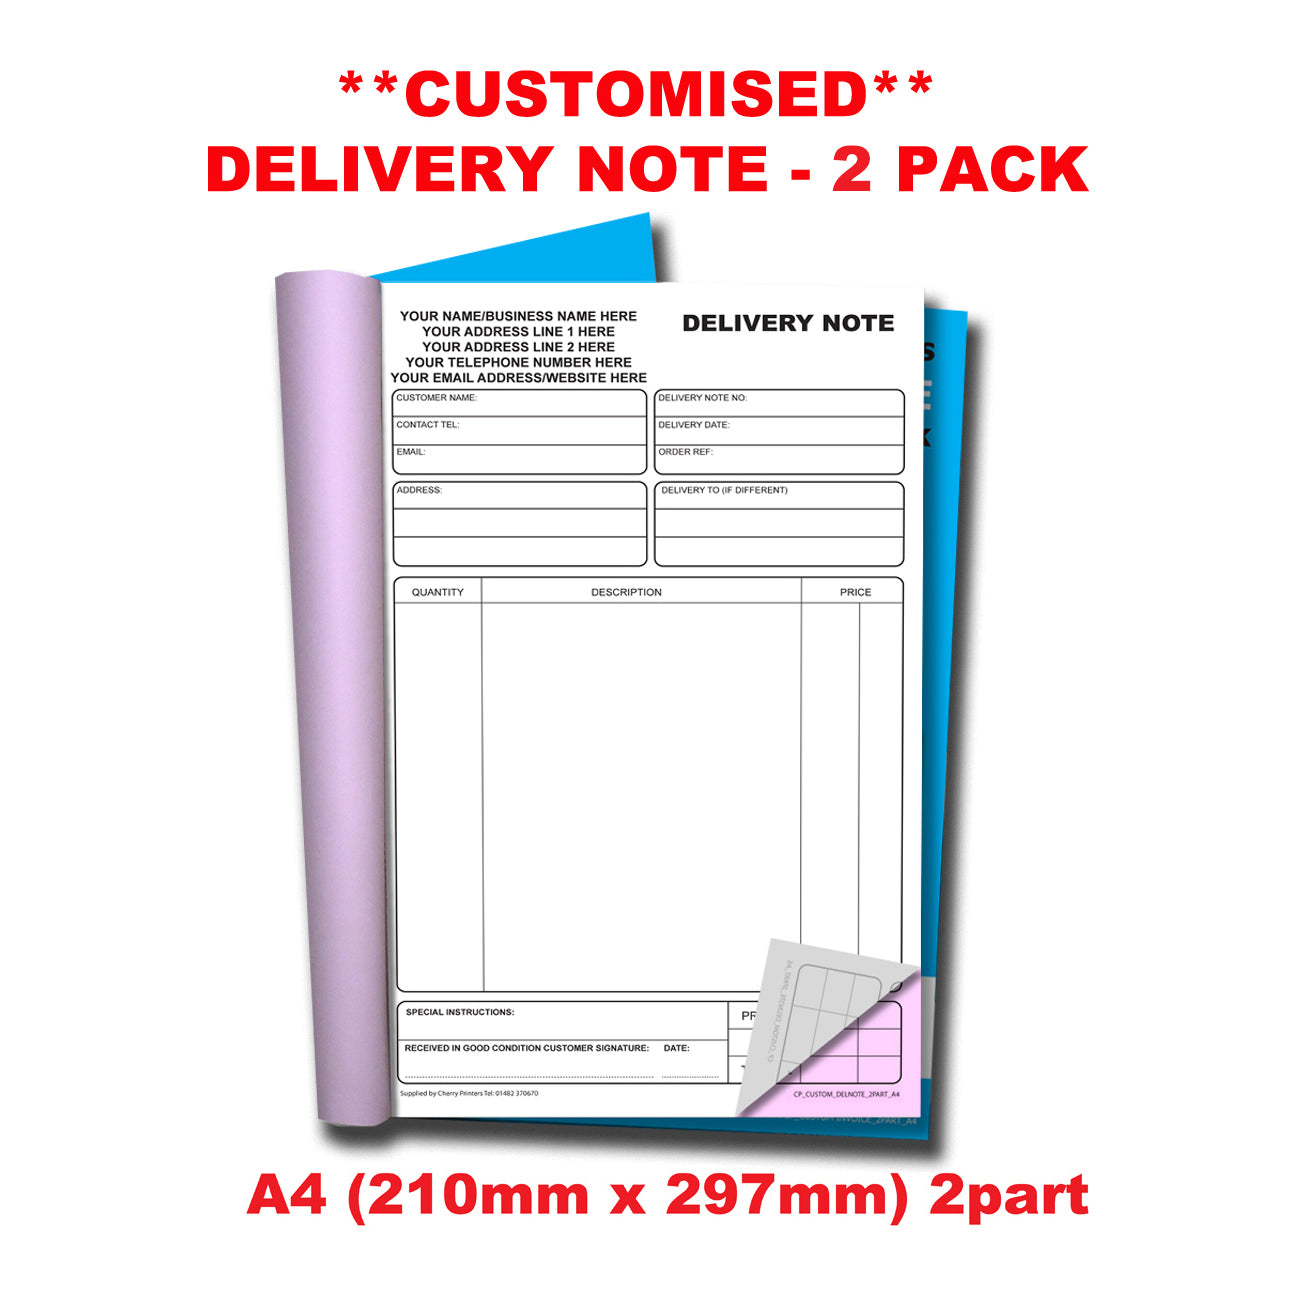 NCR *CUSTOM* Delivery Note Duplicate Book A4 | 2 Book Pack